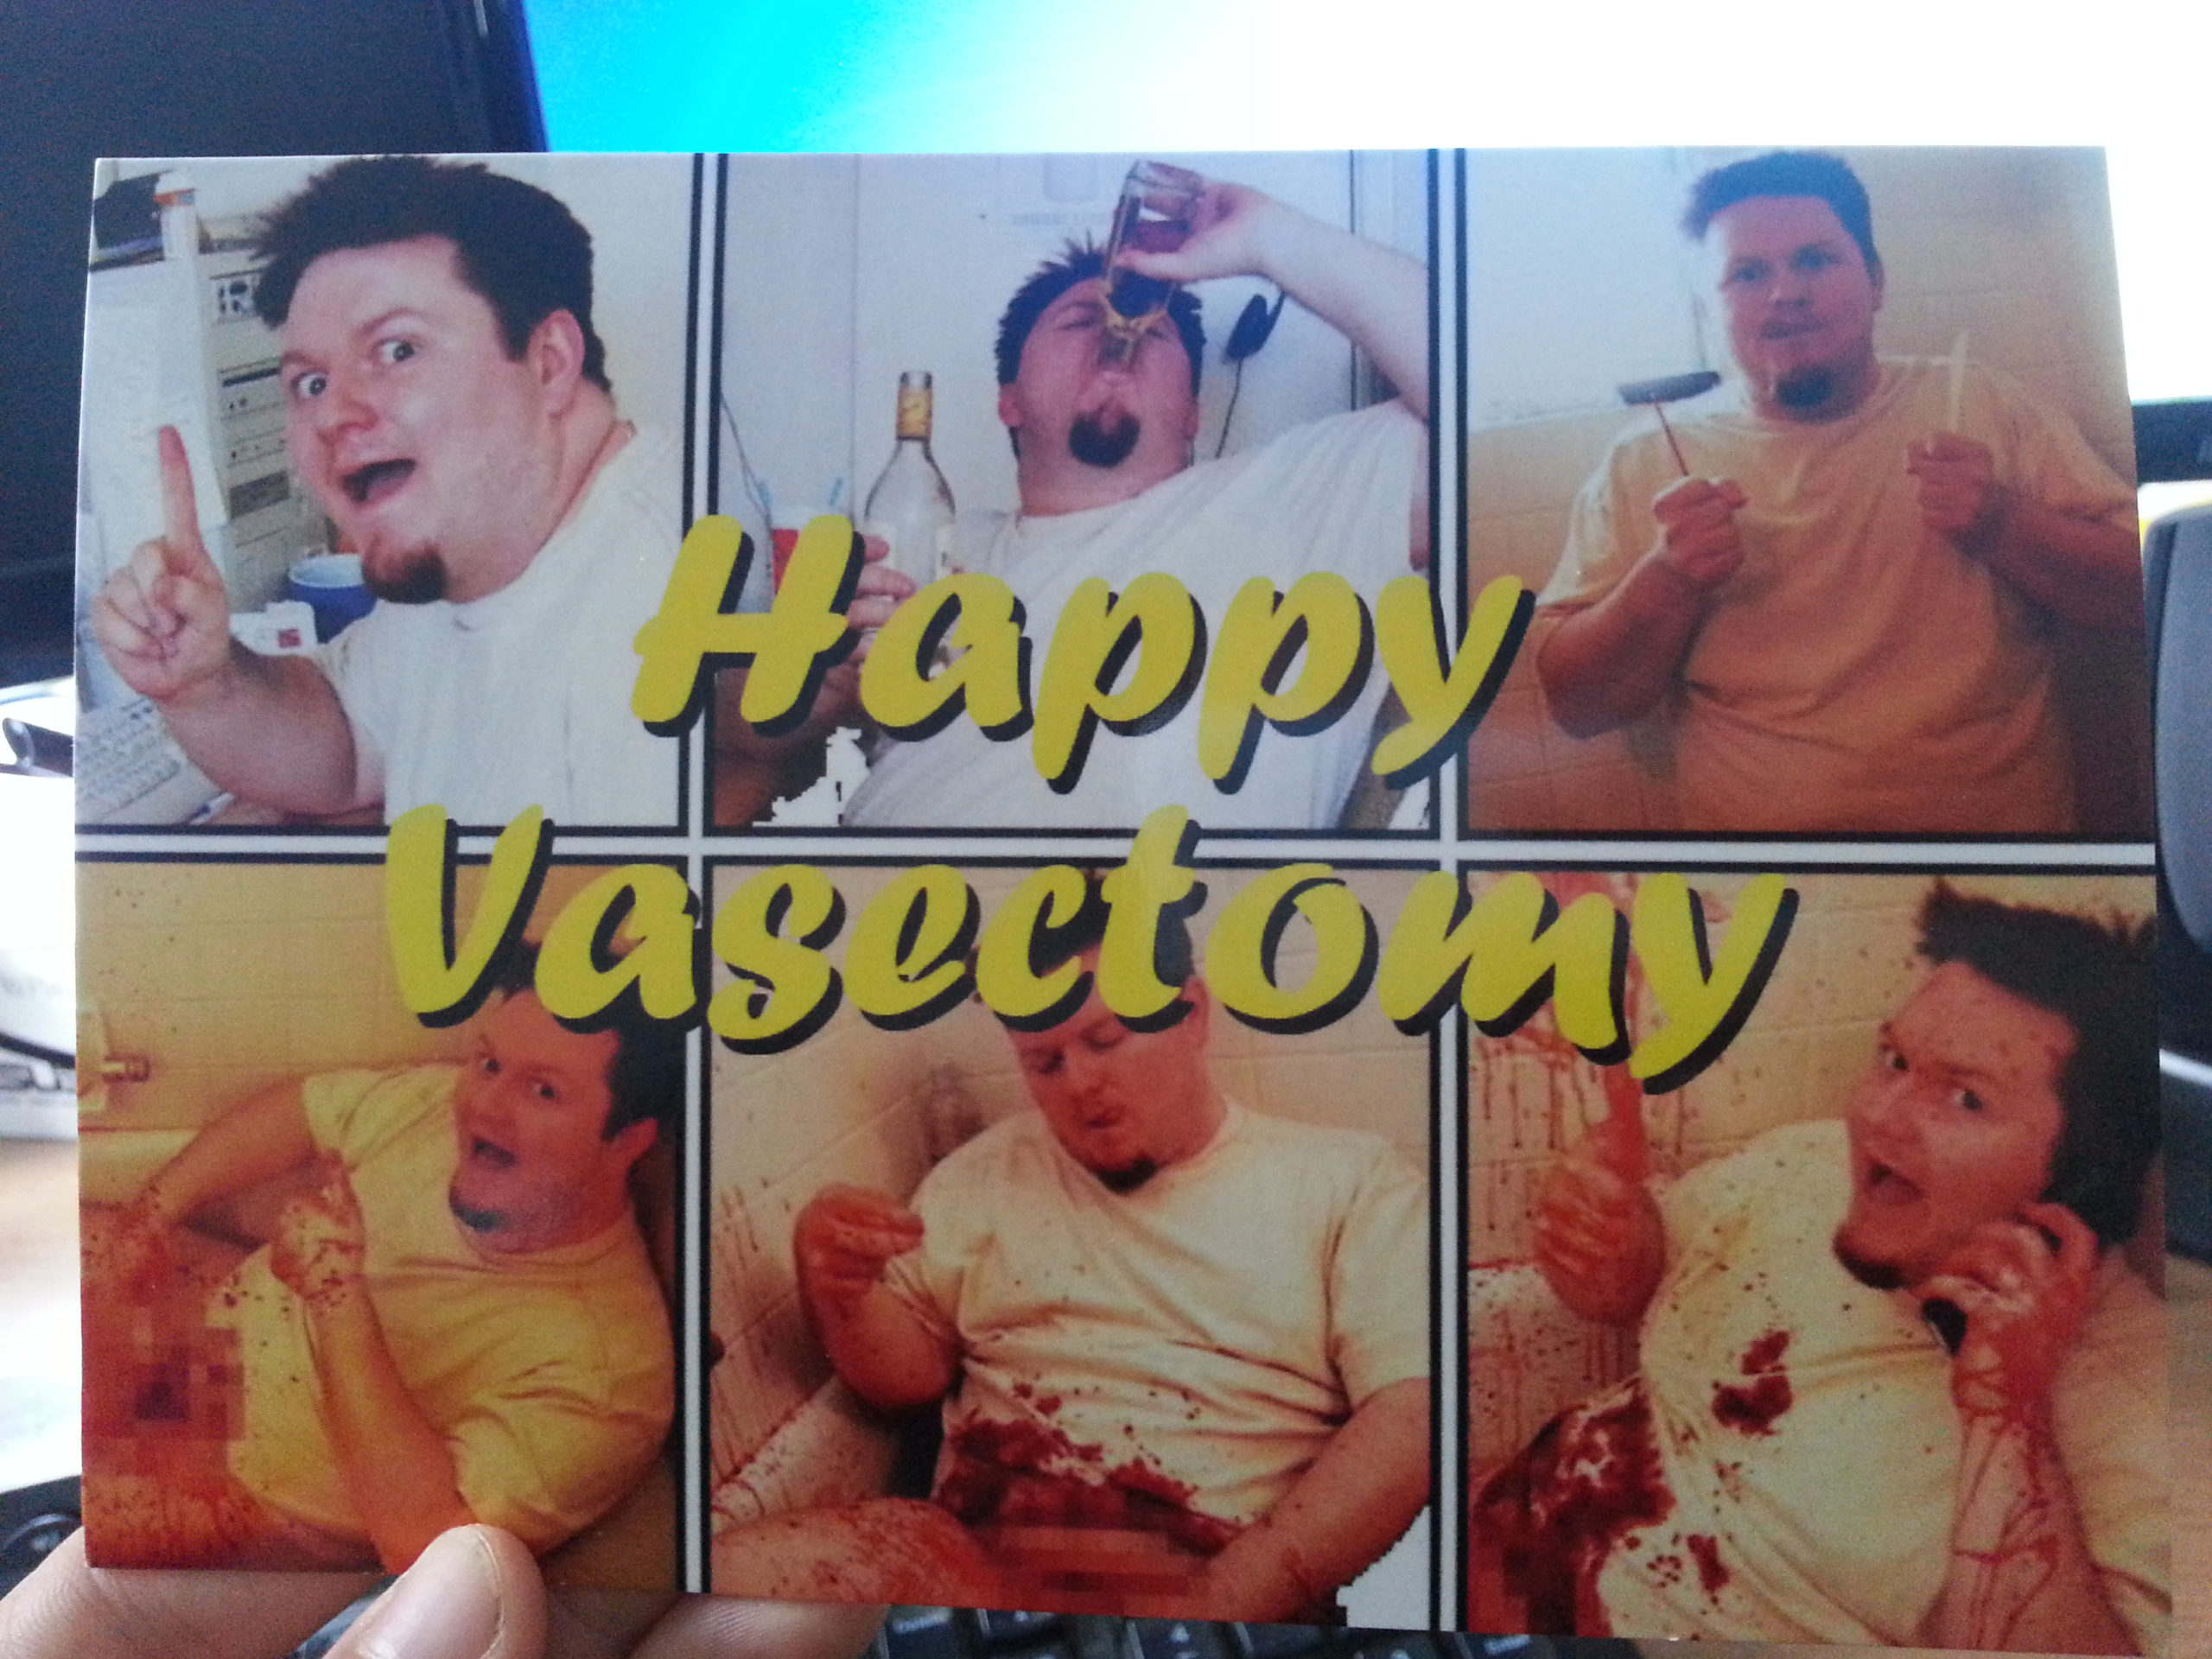 "Happy Vasectomy" card from Liz and Simon